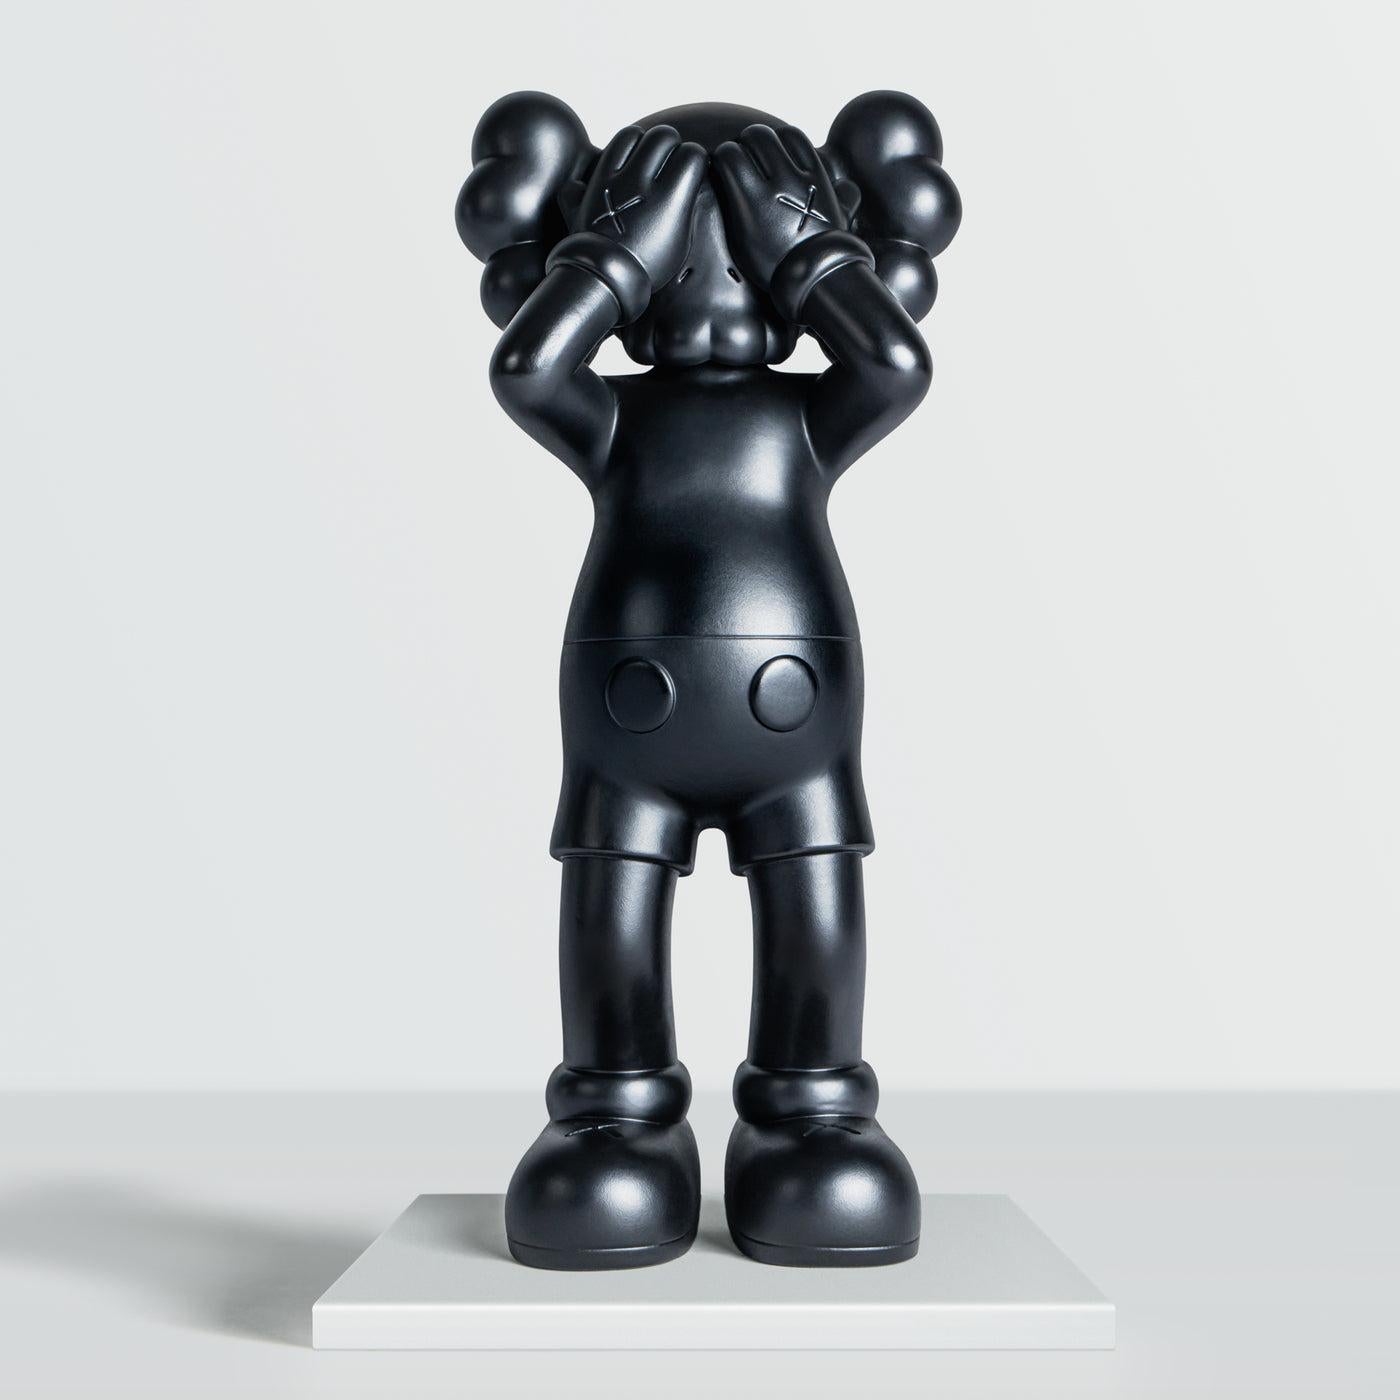 KAWS Figurative Sculpture - at this time